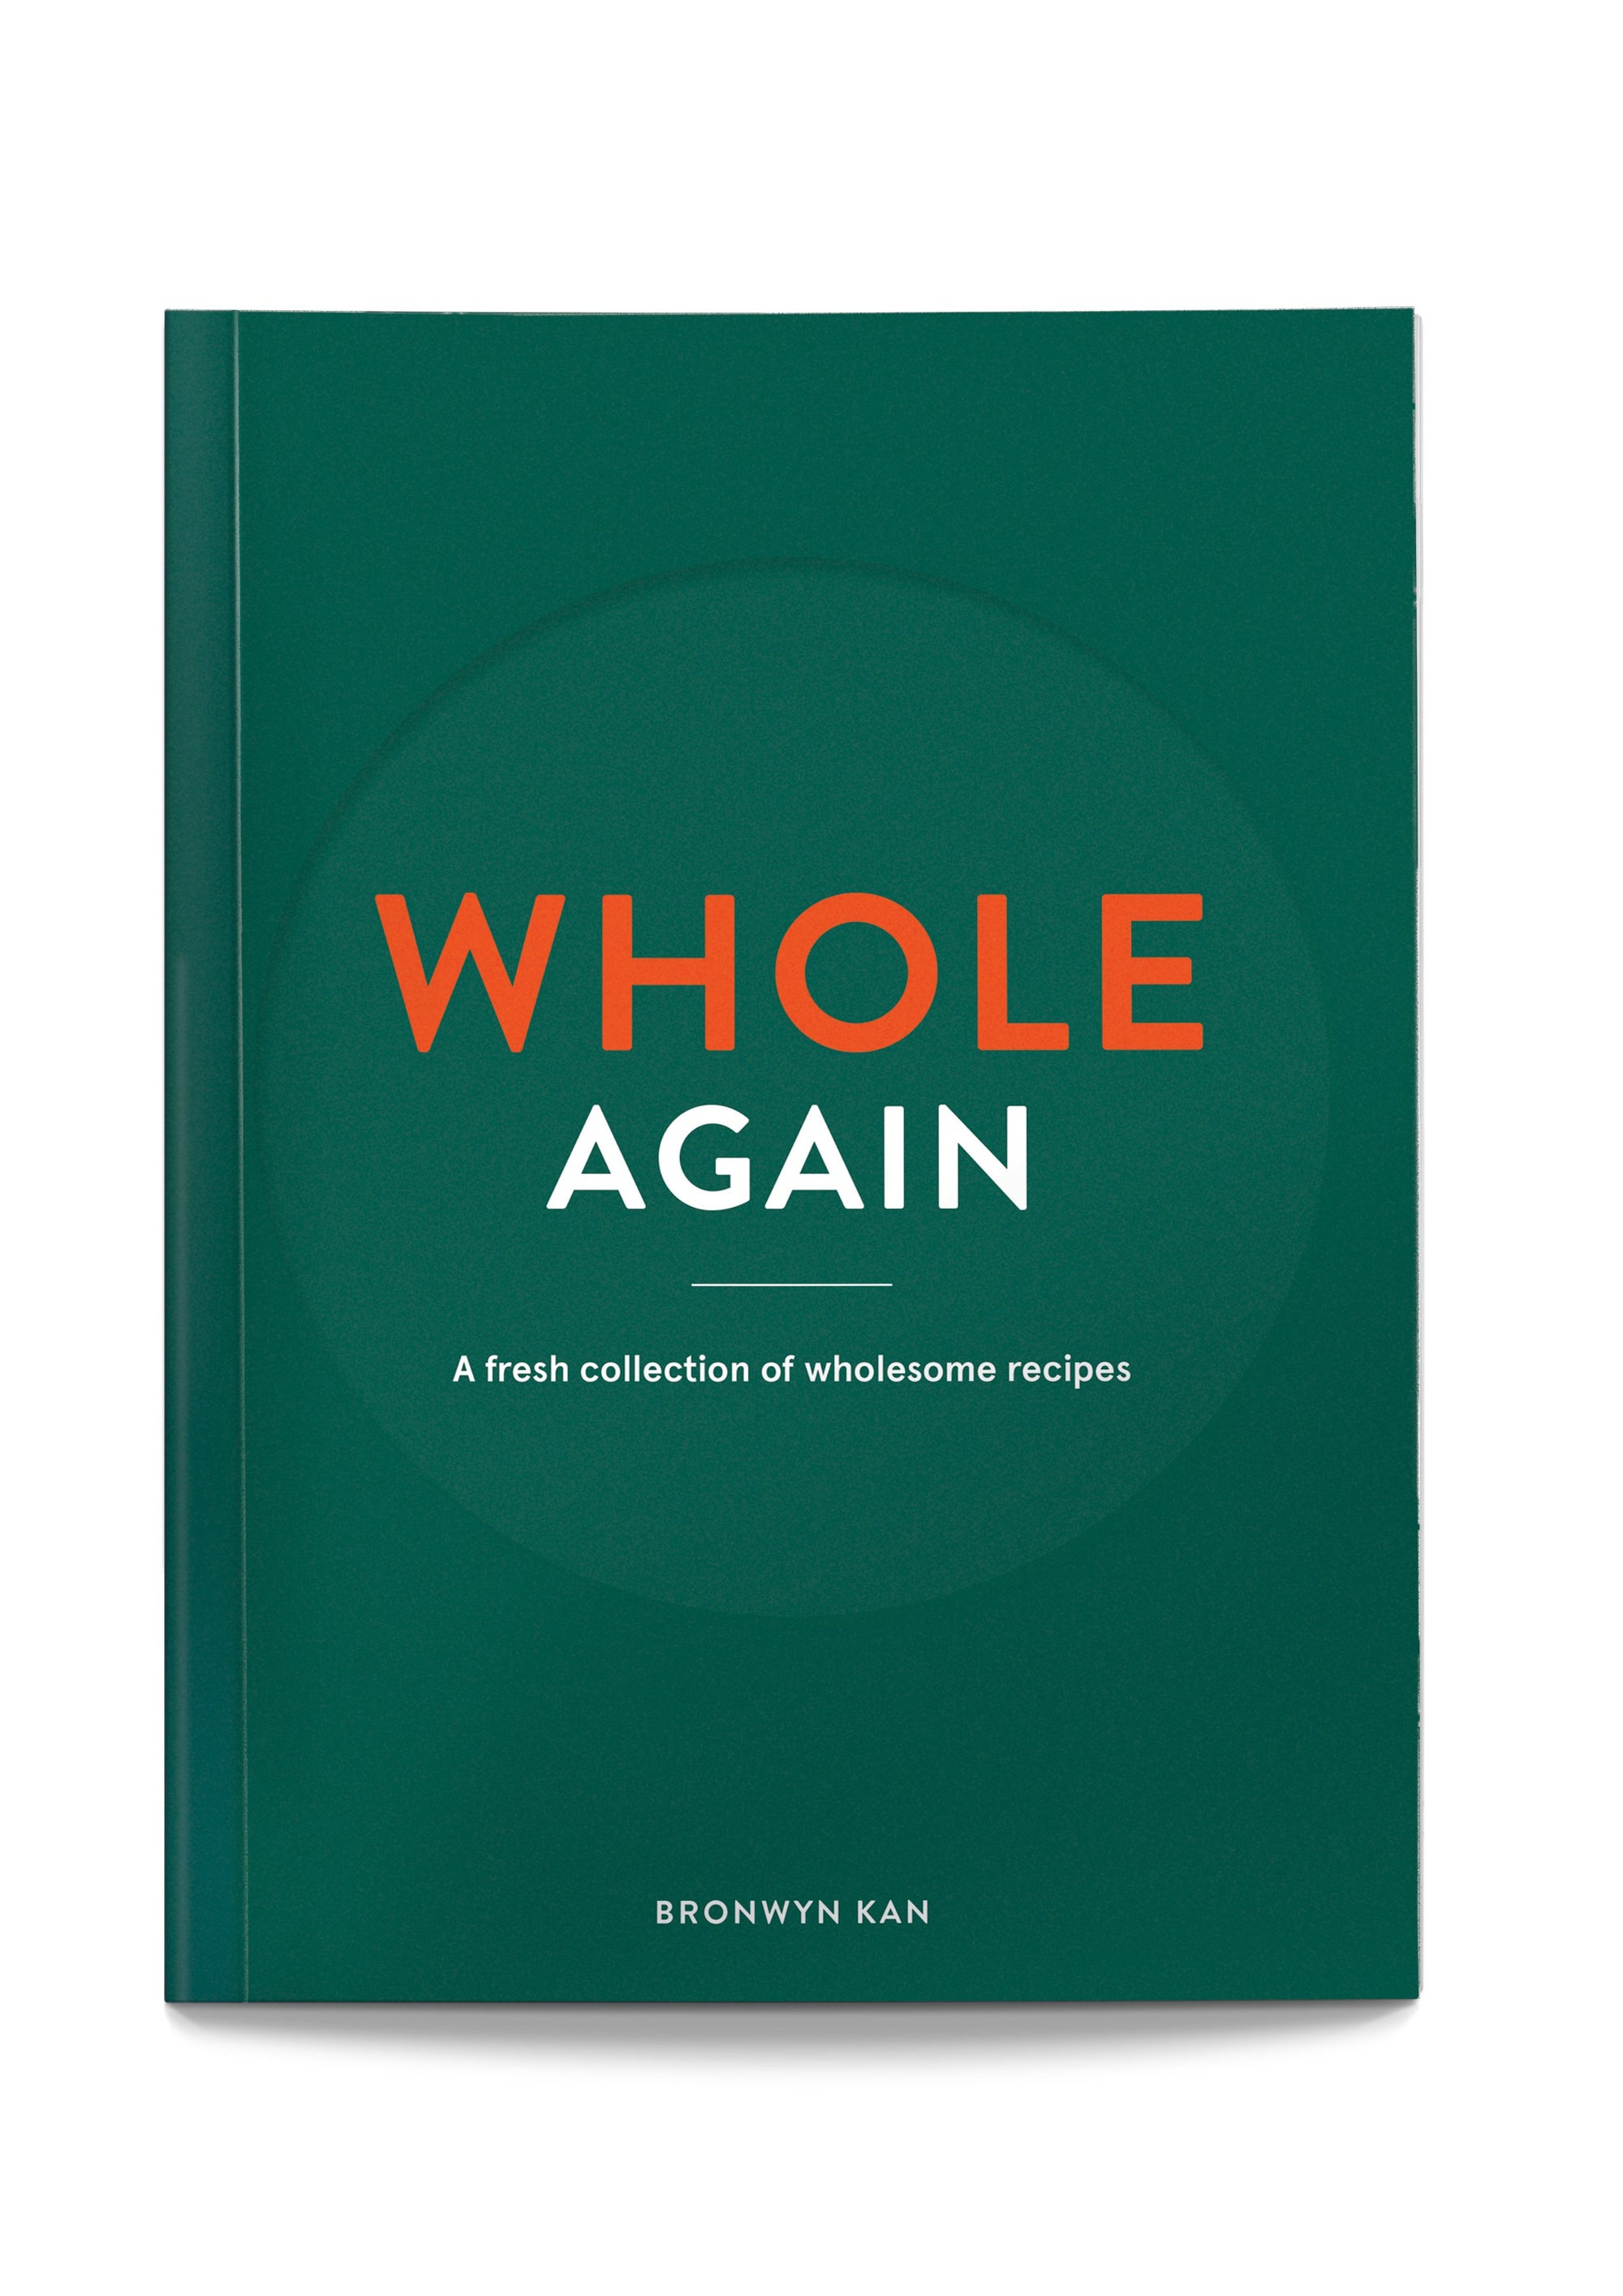 Whole Again - A Fresh Collection of Wholesome Recipes